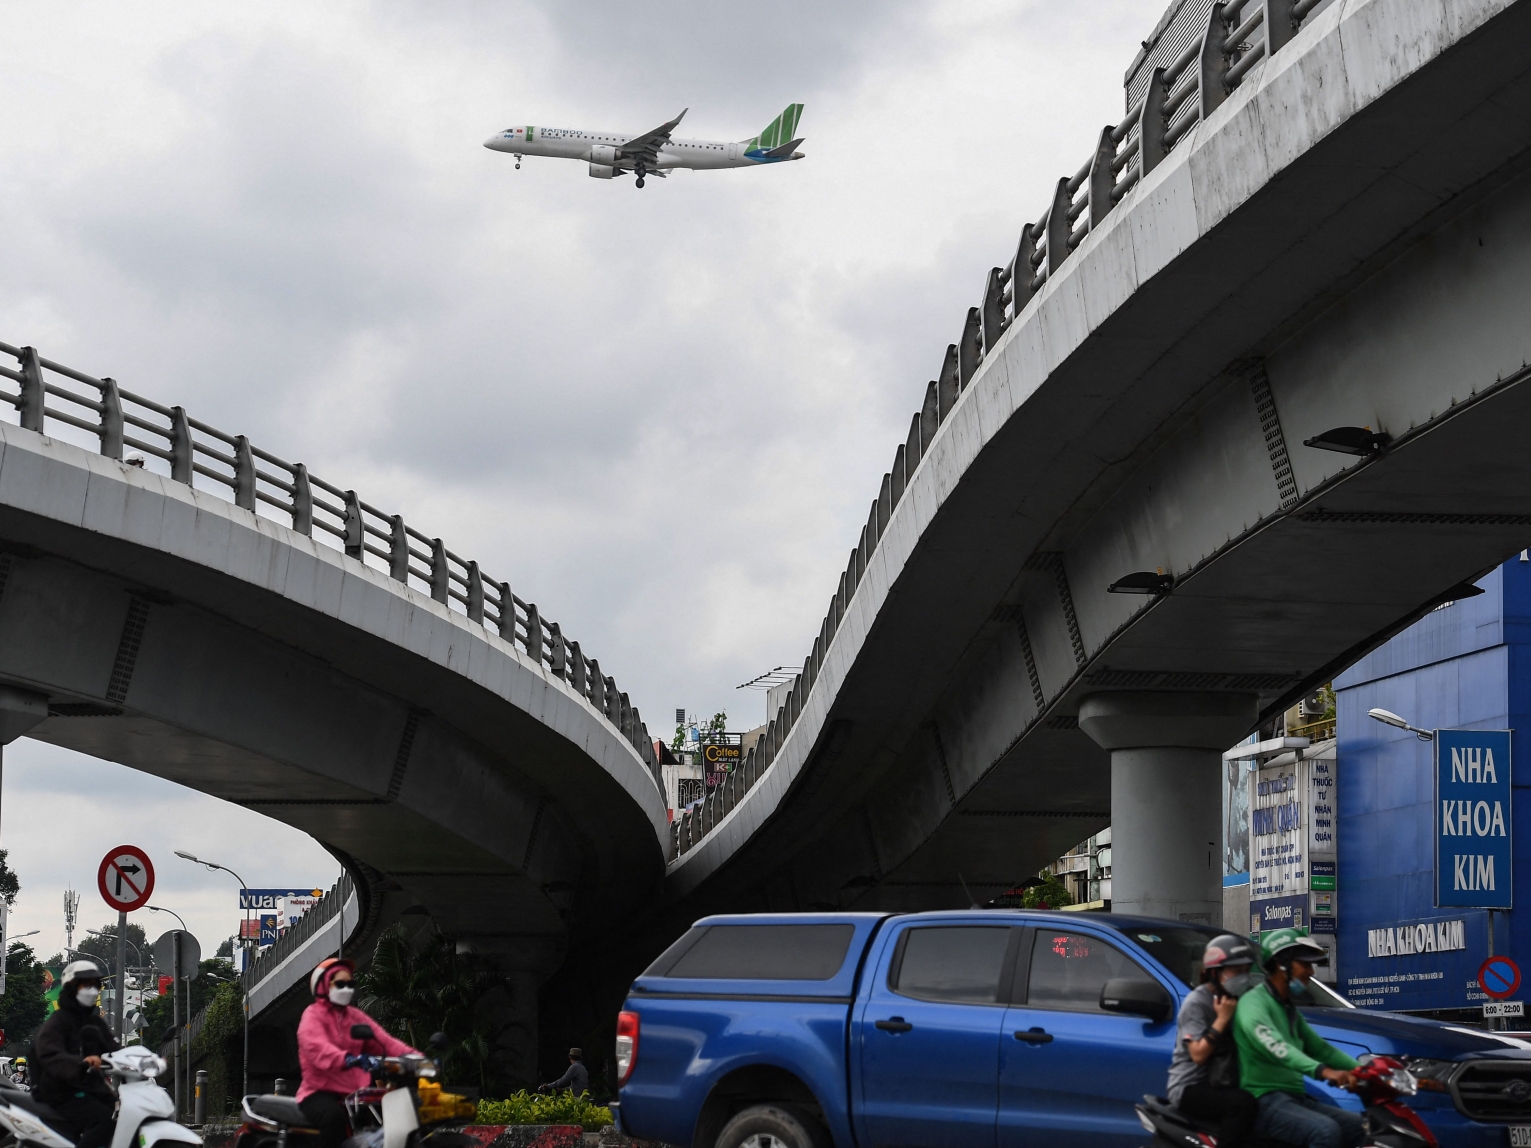 An airplane flies over commuters on a street in Ho Chi Minh City on September 22, 2022. Tan Son Nhat International Airport has been operating well over capacity for years, but efforts to build a third terminal have been slowed due, in part, to what analysts say are unintended consequences of an anti-corruption crackdown. 